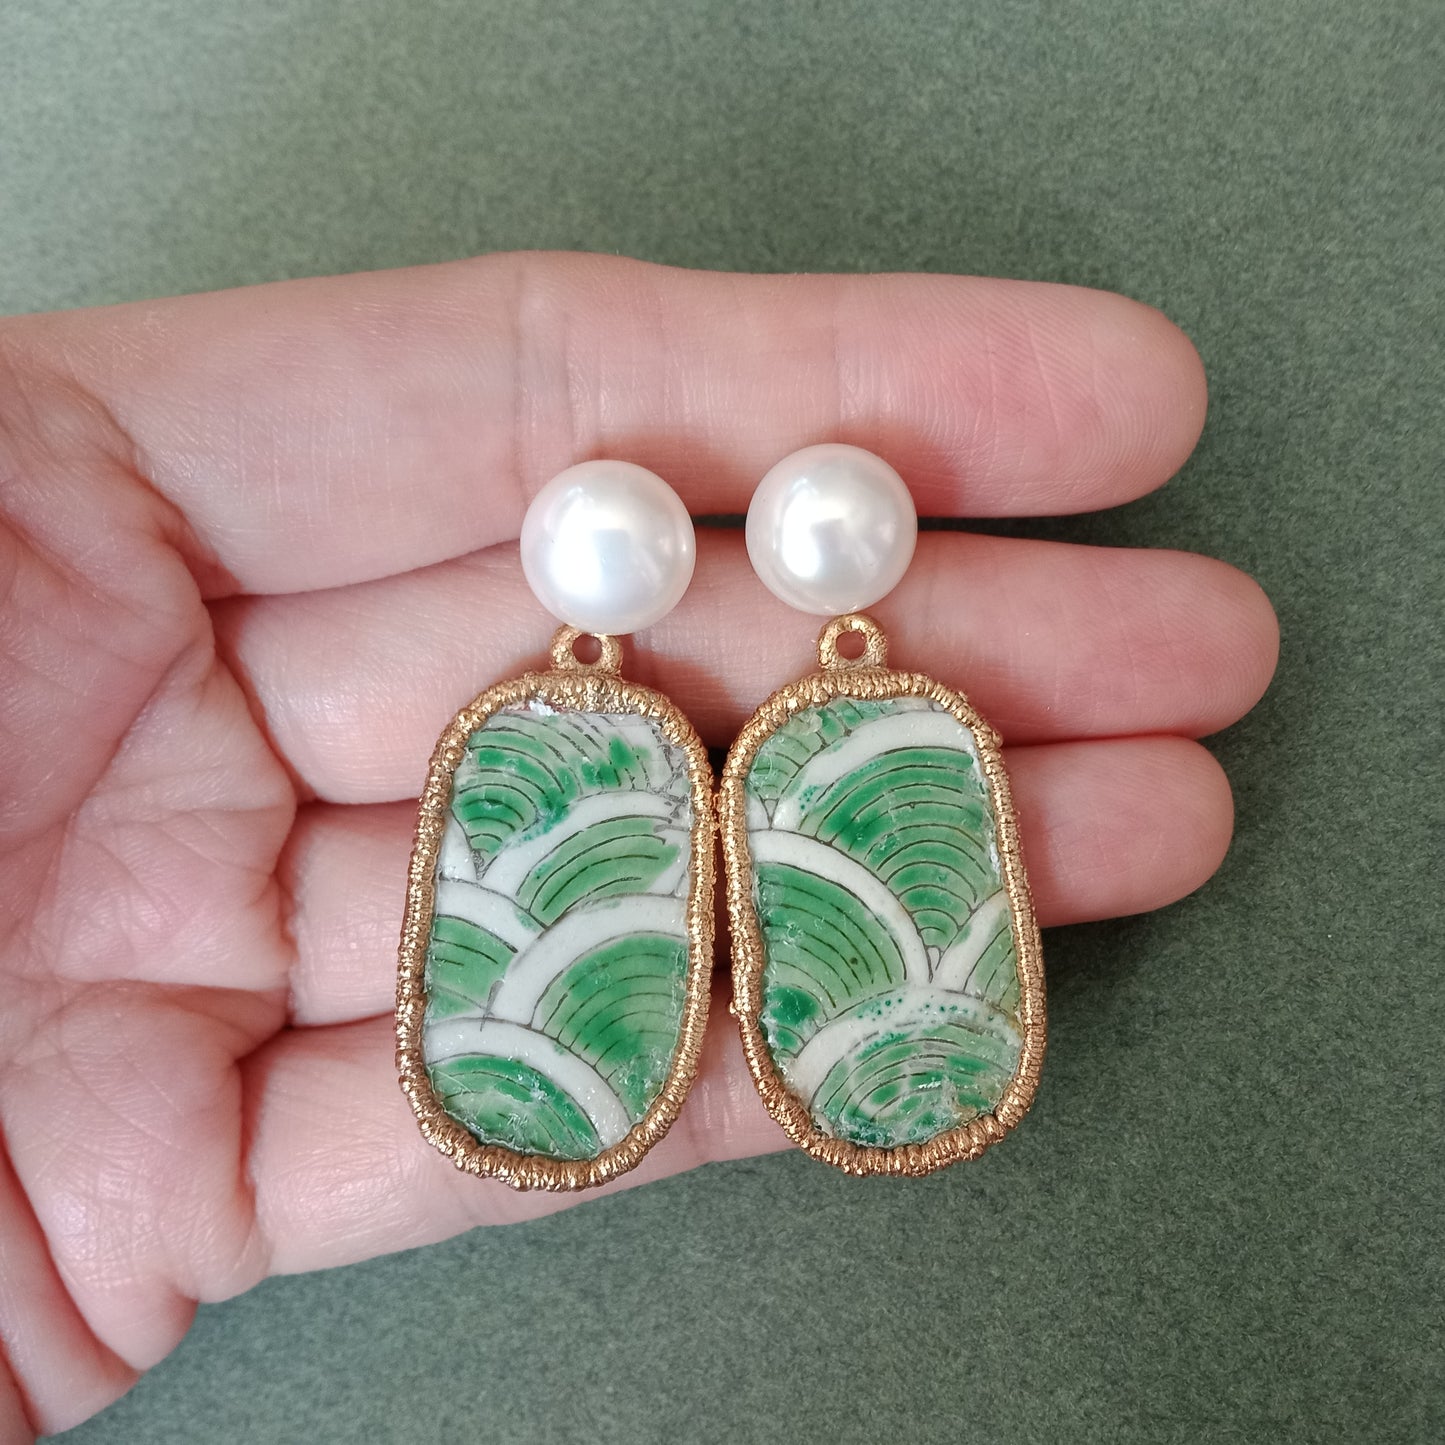 Lapping waves green porcelain earrings